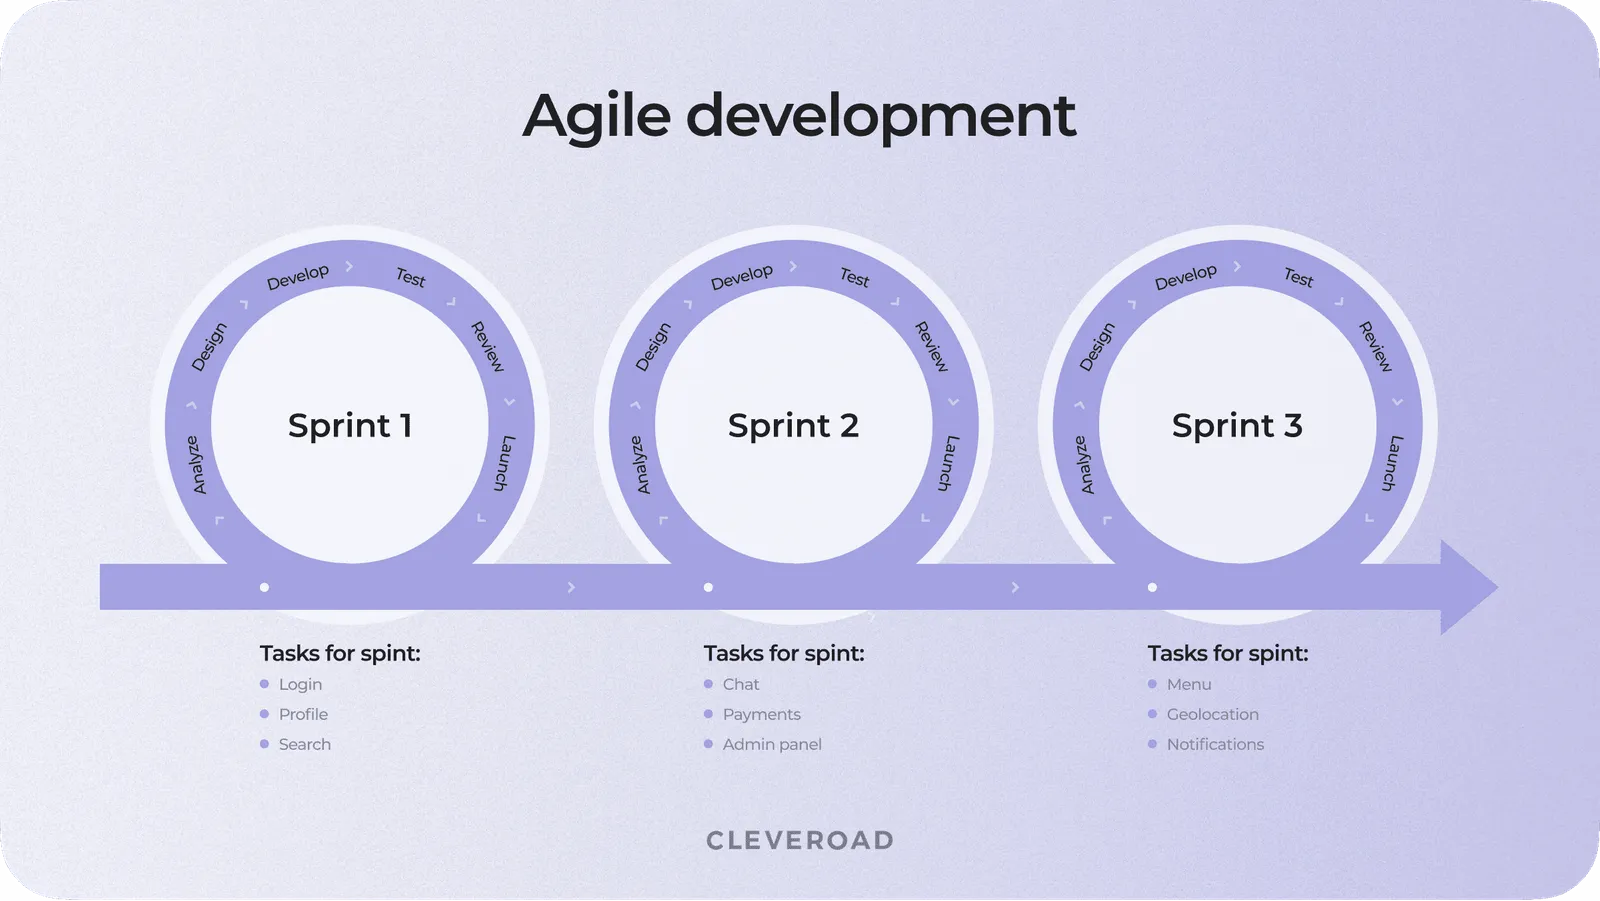 Agile as one of the types of software development methodologies